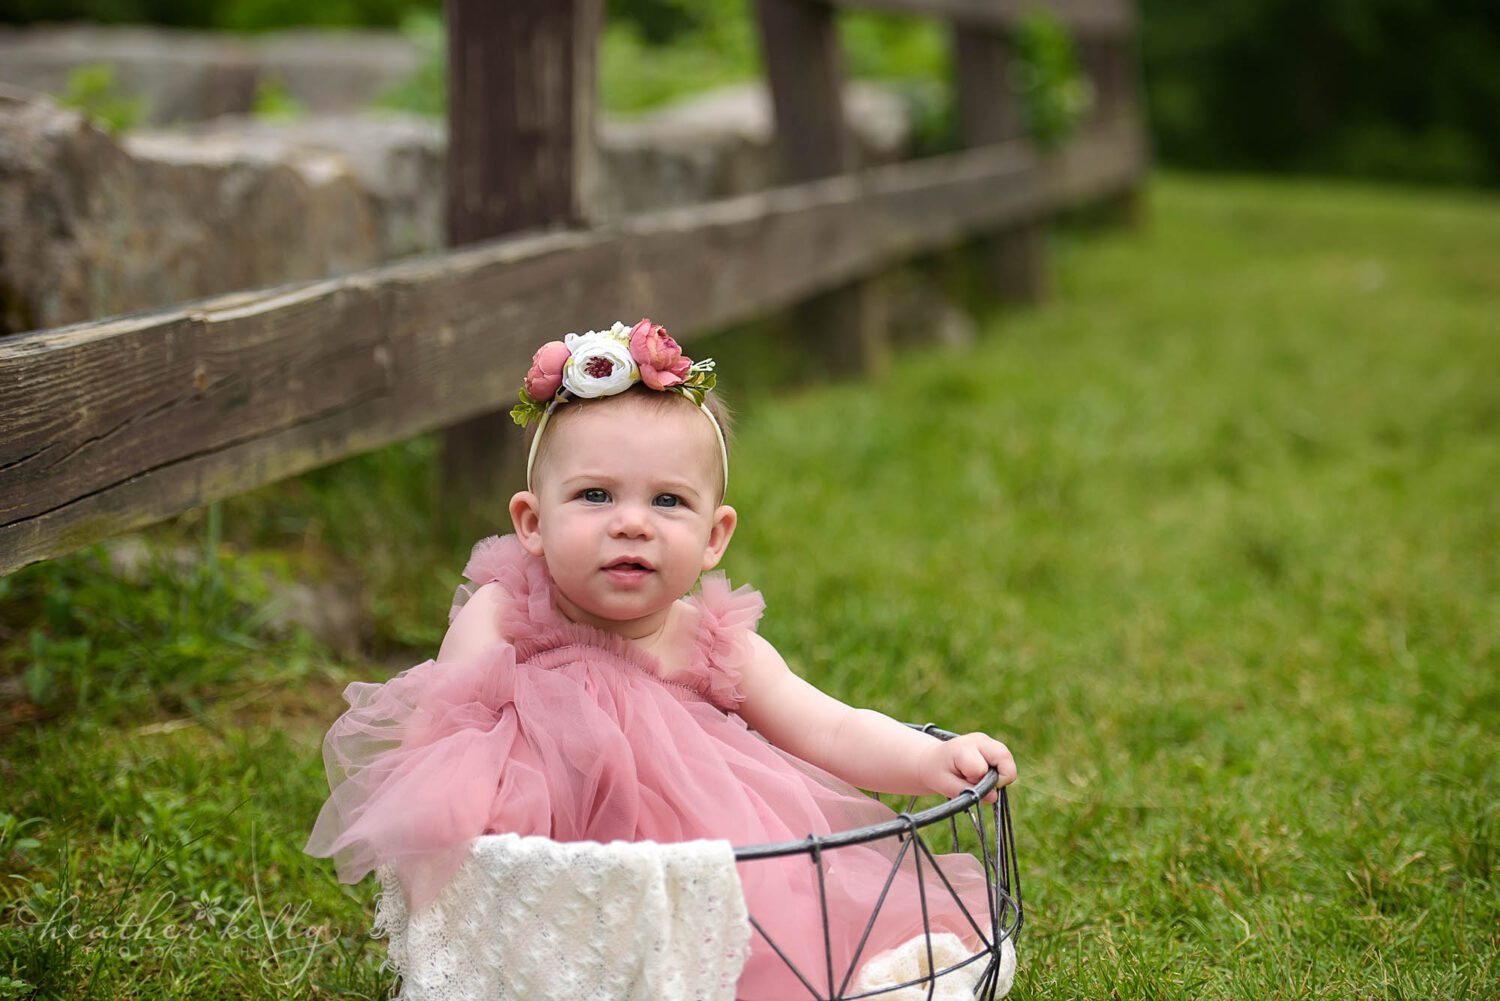 mahopac ny family photography

6 month old girl in pink dress and flower headband sits in a wire basket outside near a wooden fence. 